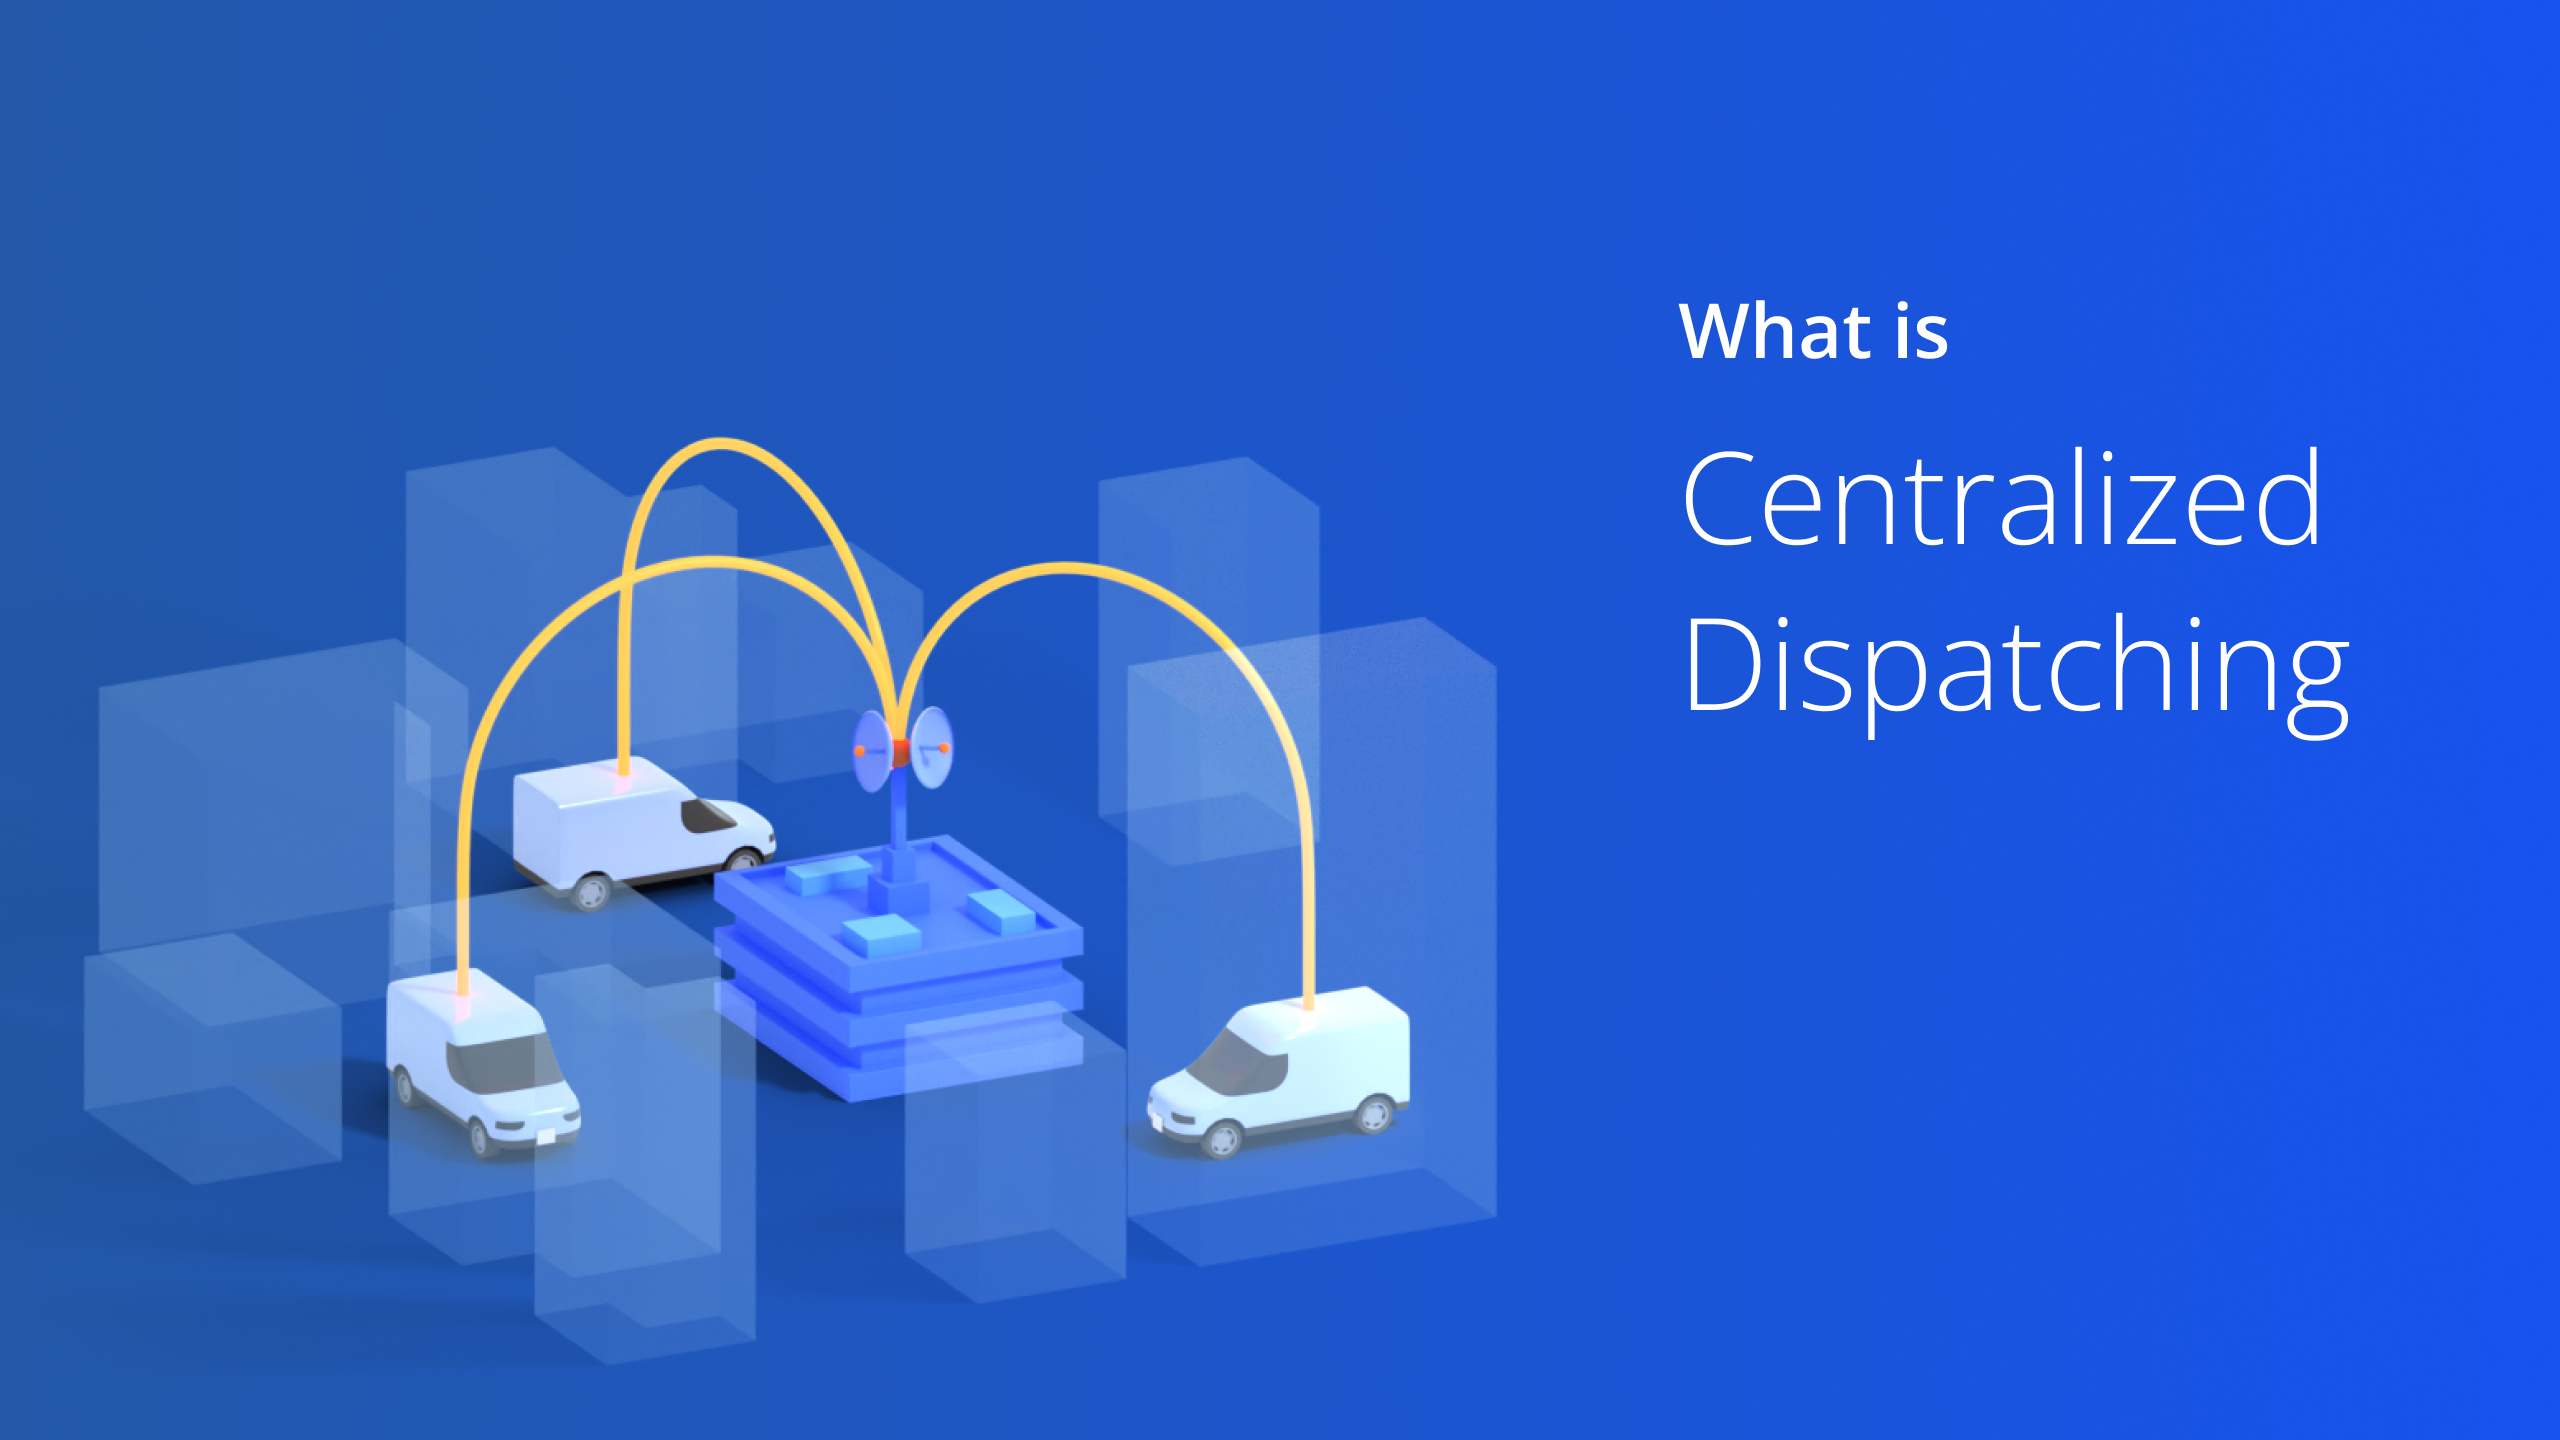 Custom Image - What is Centralized Dispatching?